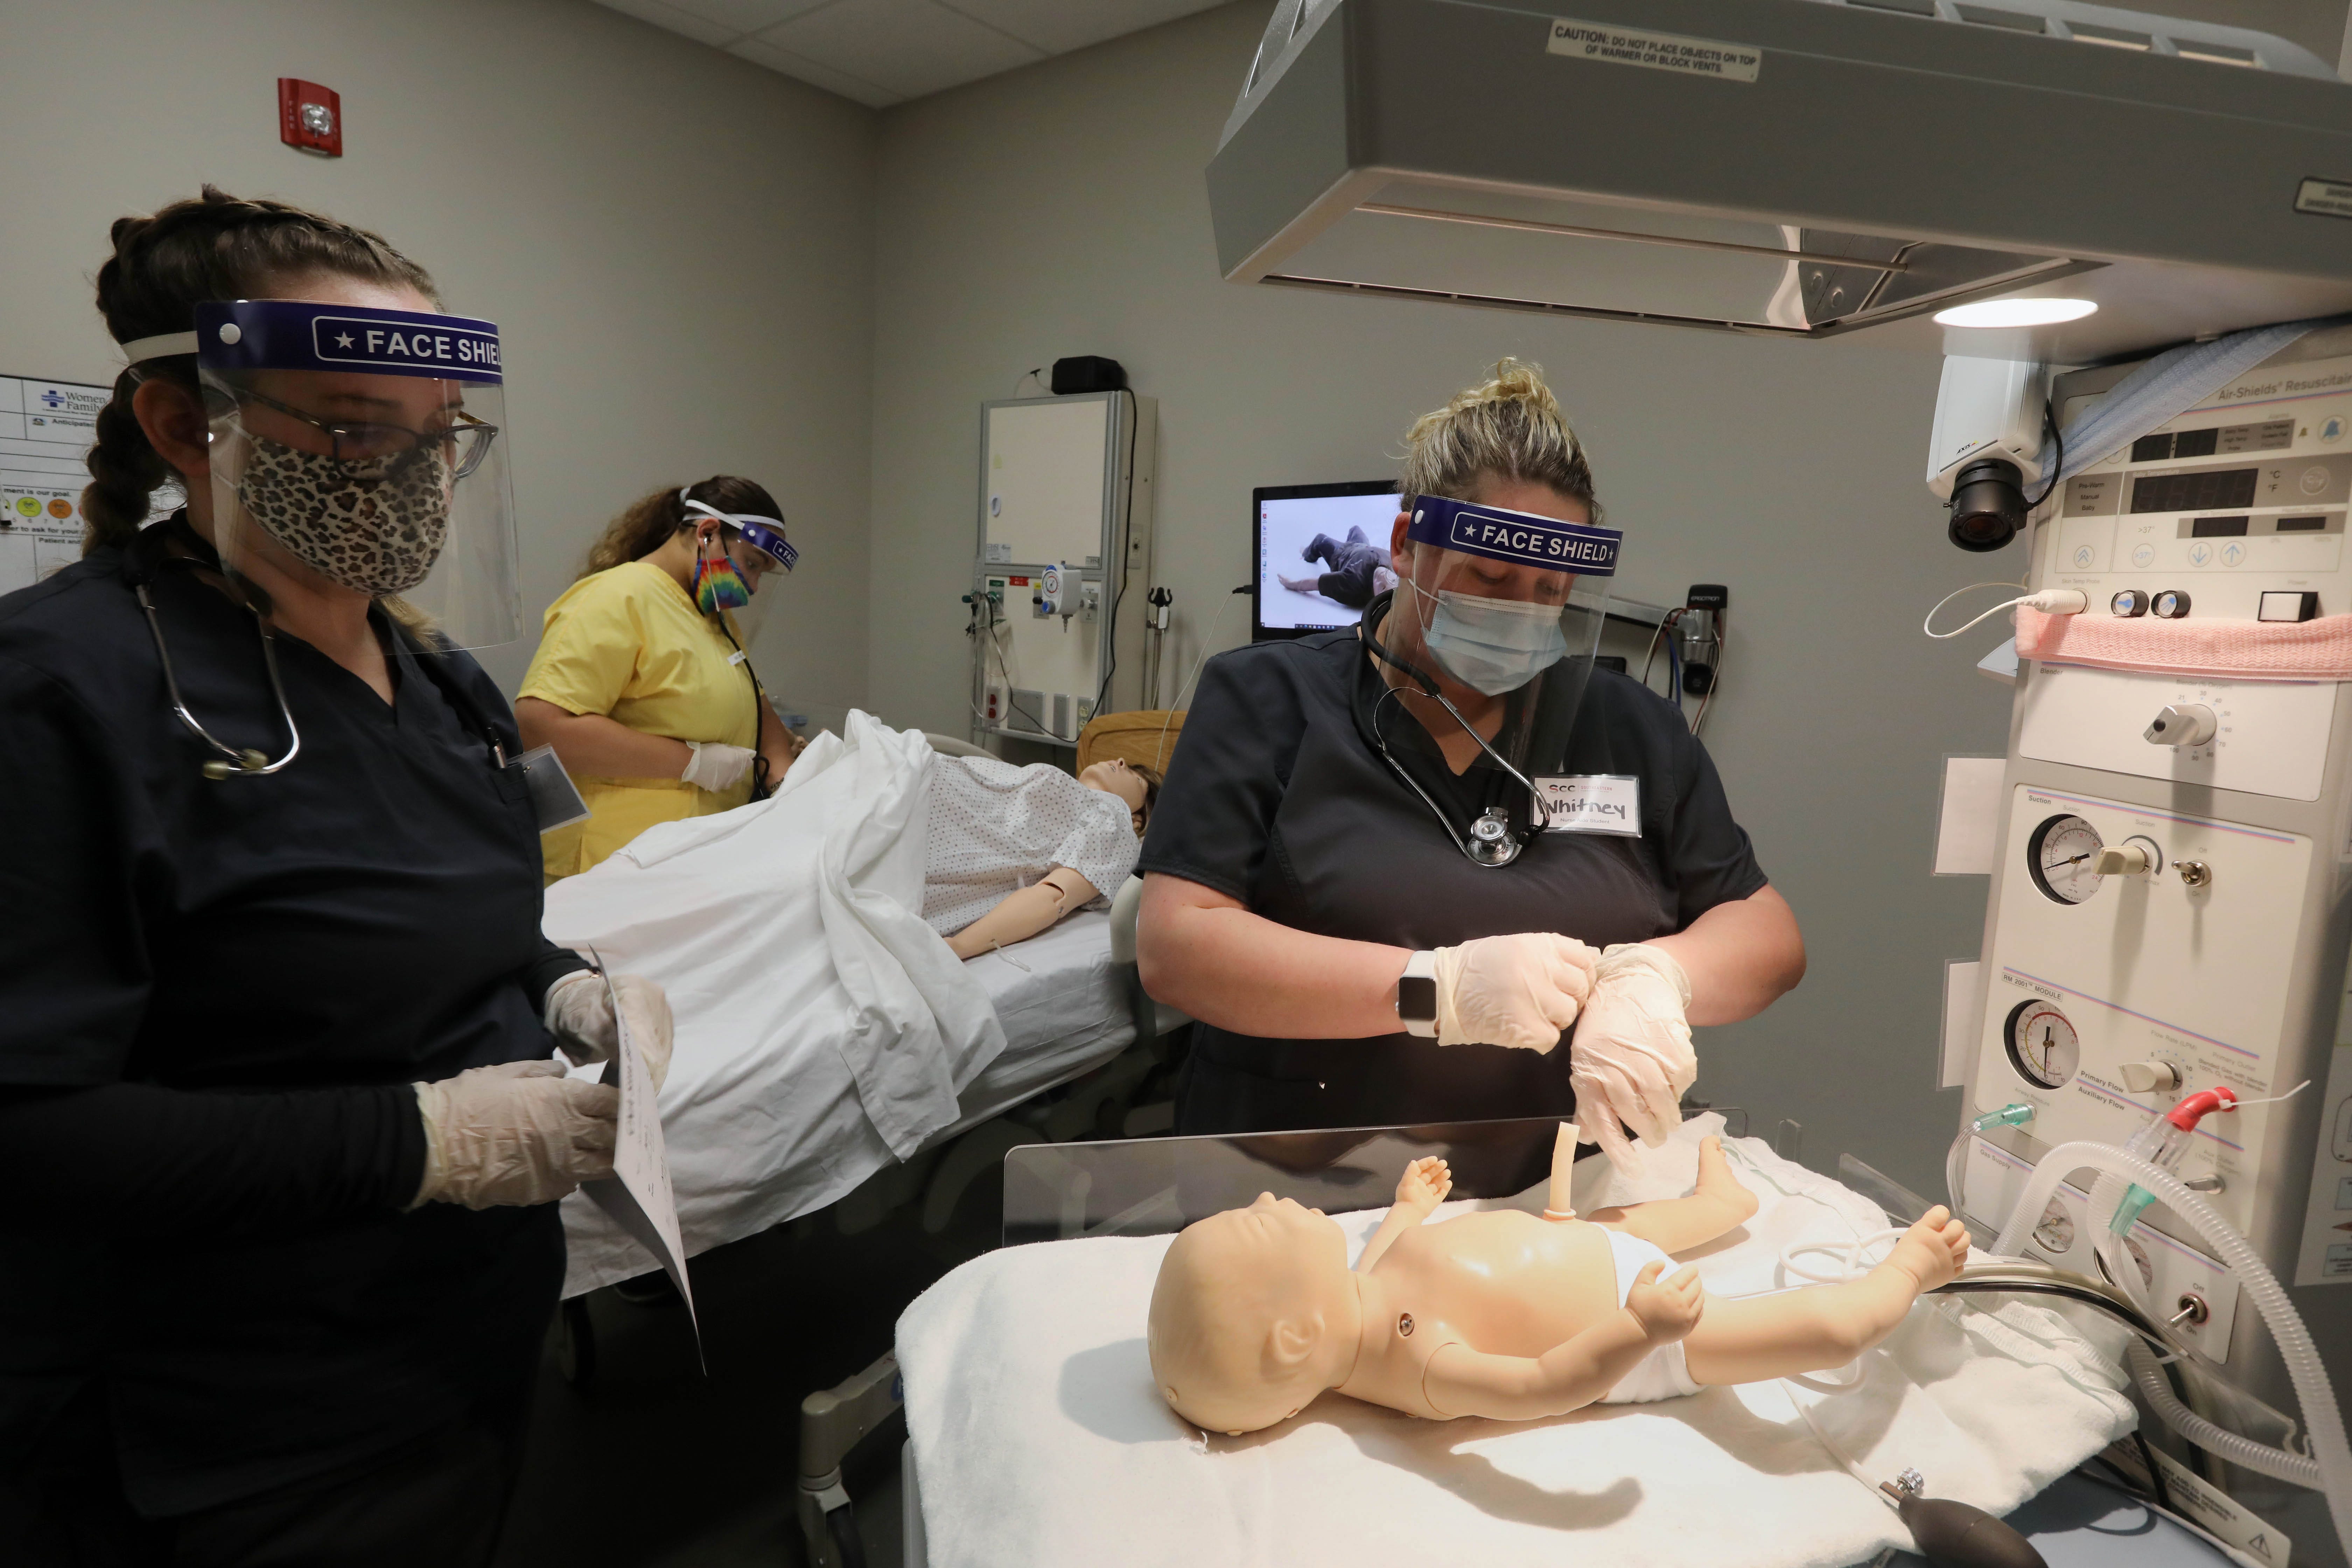 4:41 p.m. In the sterile setting of the Southeastern Community College Health Professions Clinical Simulation Center, certified nursing assistant students Ñ including, from left, Darcy Lumbeck, Carlee Brown and Whitney Finley Ñ wear masks while finishing one of their last sets of clinicals Tuesday, Dec. 8, 2020, before taking their state certification written and skills test later in the month.  Due to COVID-19 restrictions at most nursing homes, where students normally complete their clinical hours, students have had to rely more on the Simulation Center to learn medical procedures, perform diagnostics, and practice patient care on realistic patient simulators.